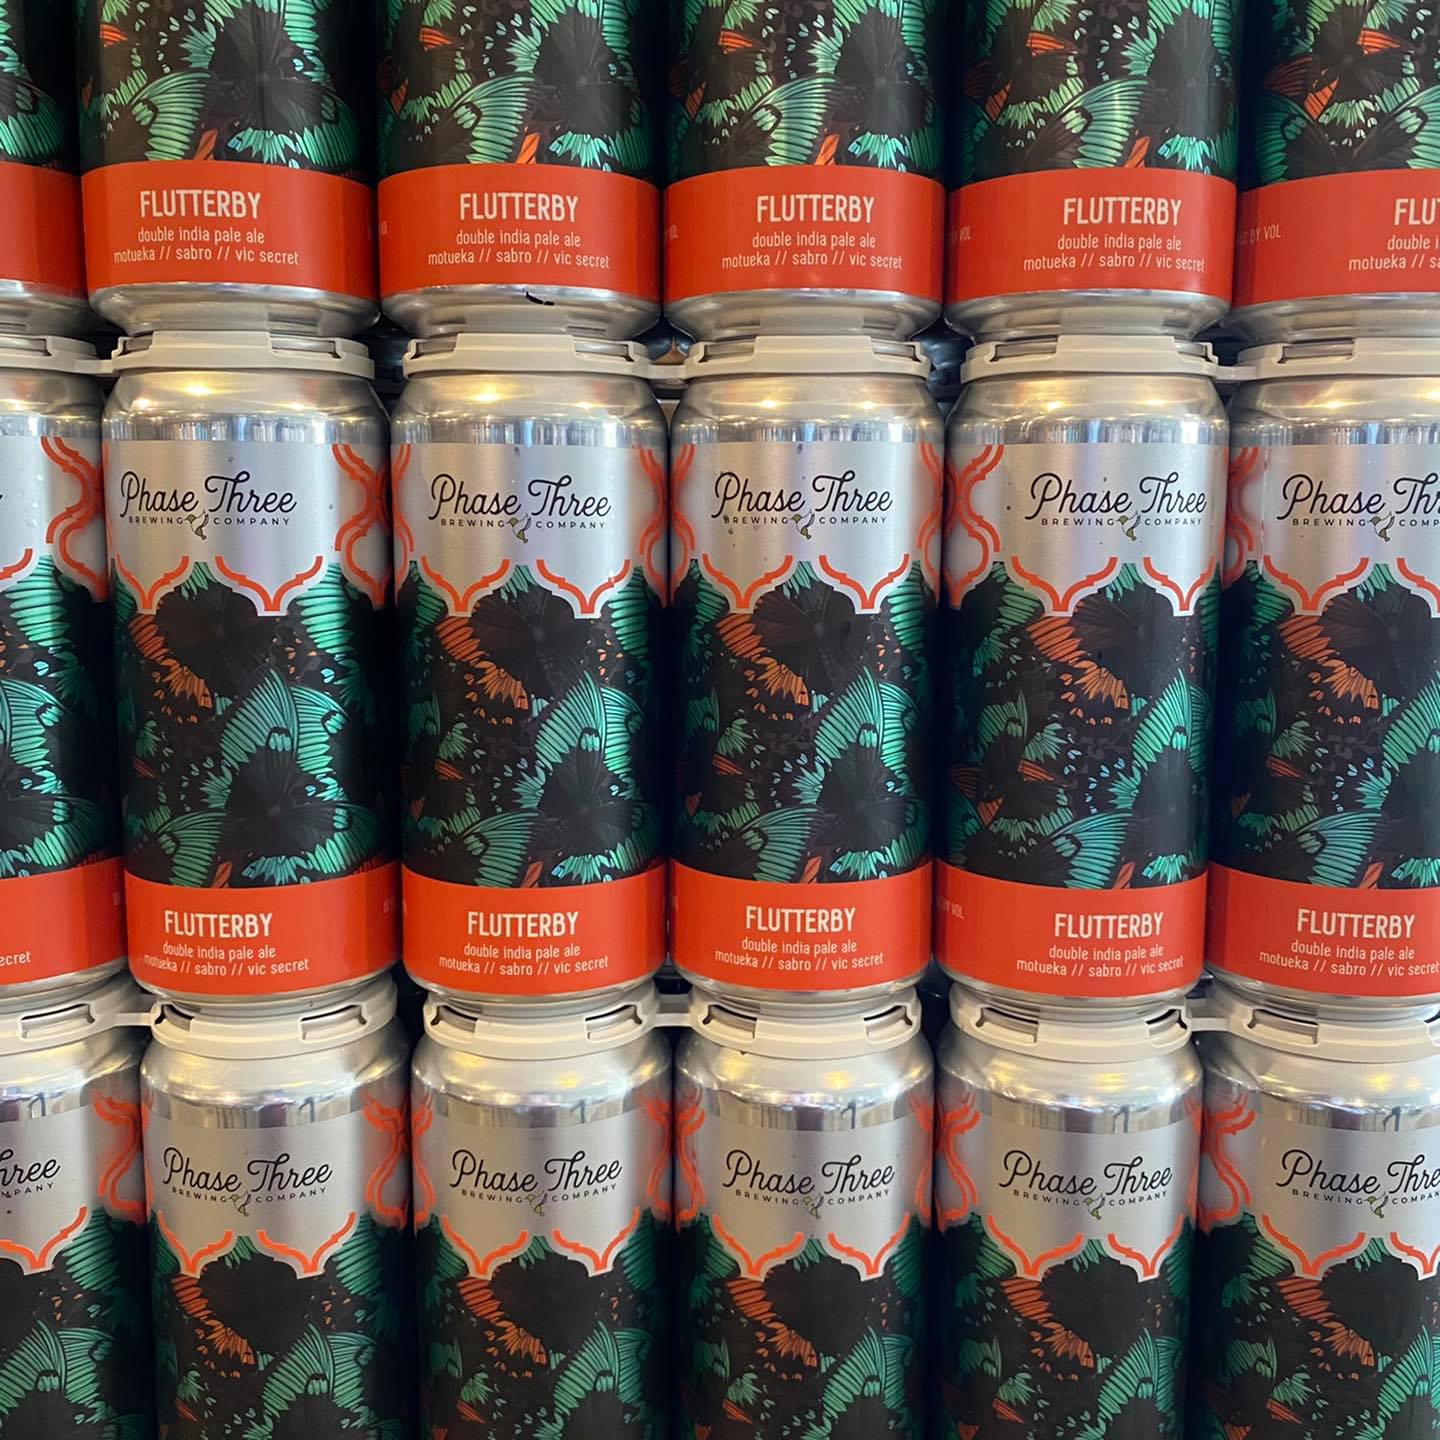 Stacks of cans from Phase Three Brewing